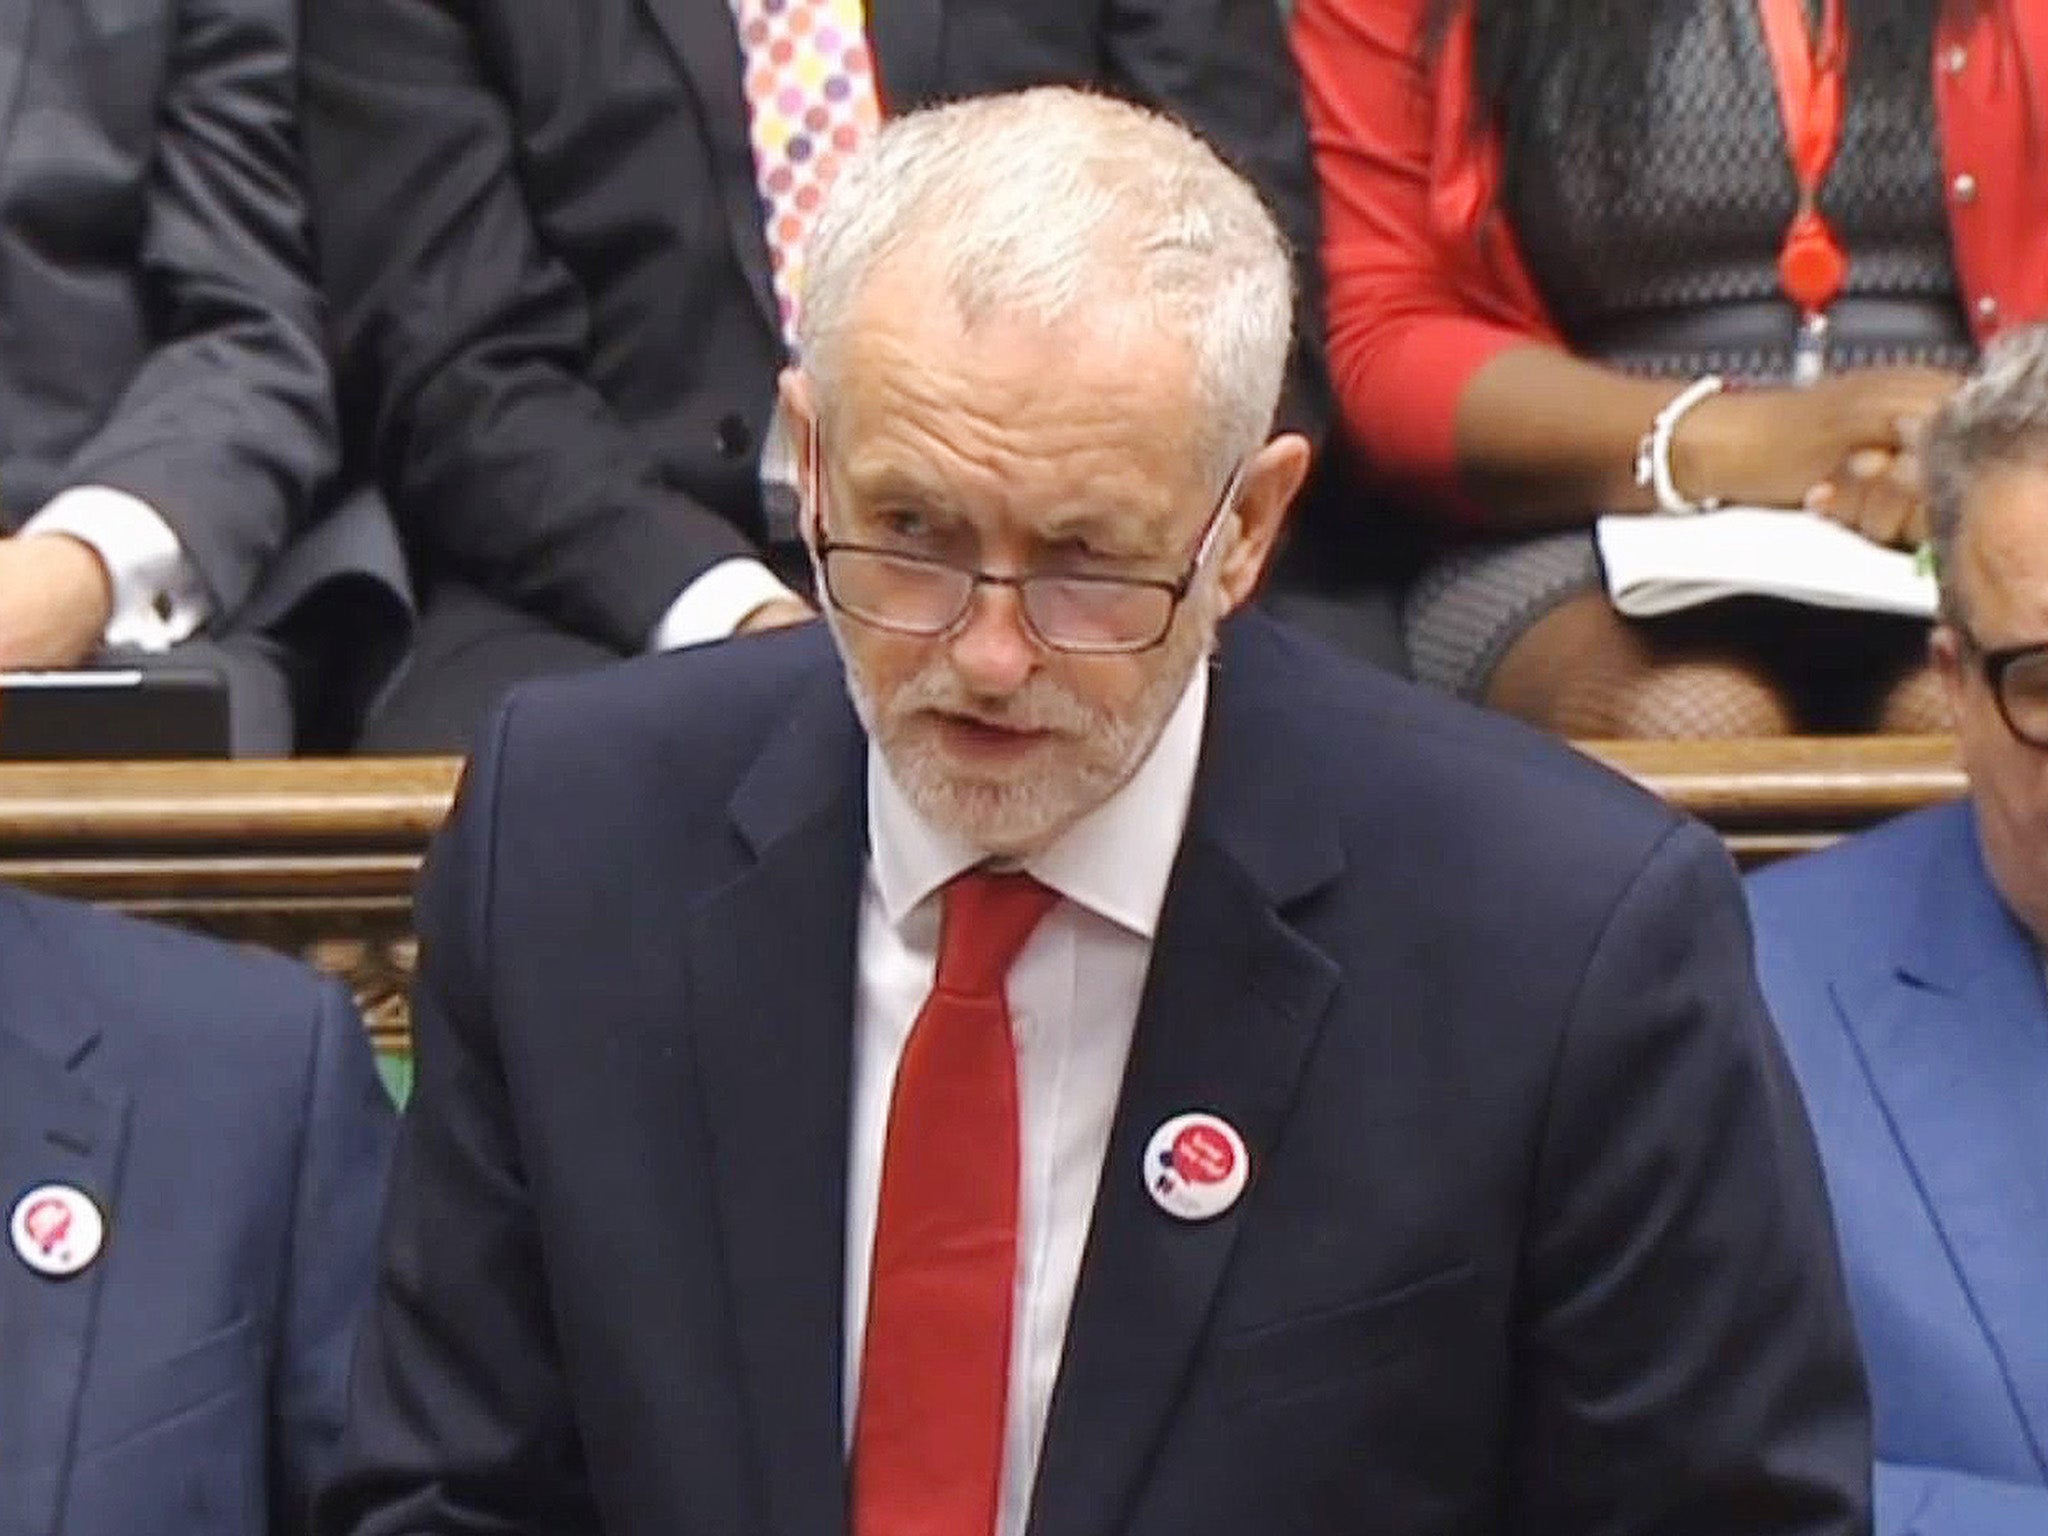 Labour leader Jeremy Corbyn speaks during Prime Minister's Questions in the House of Commons,